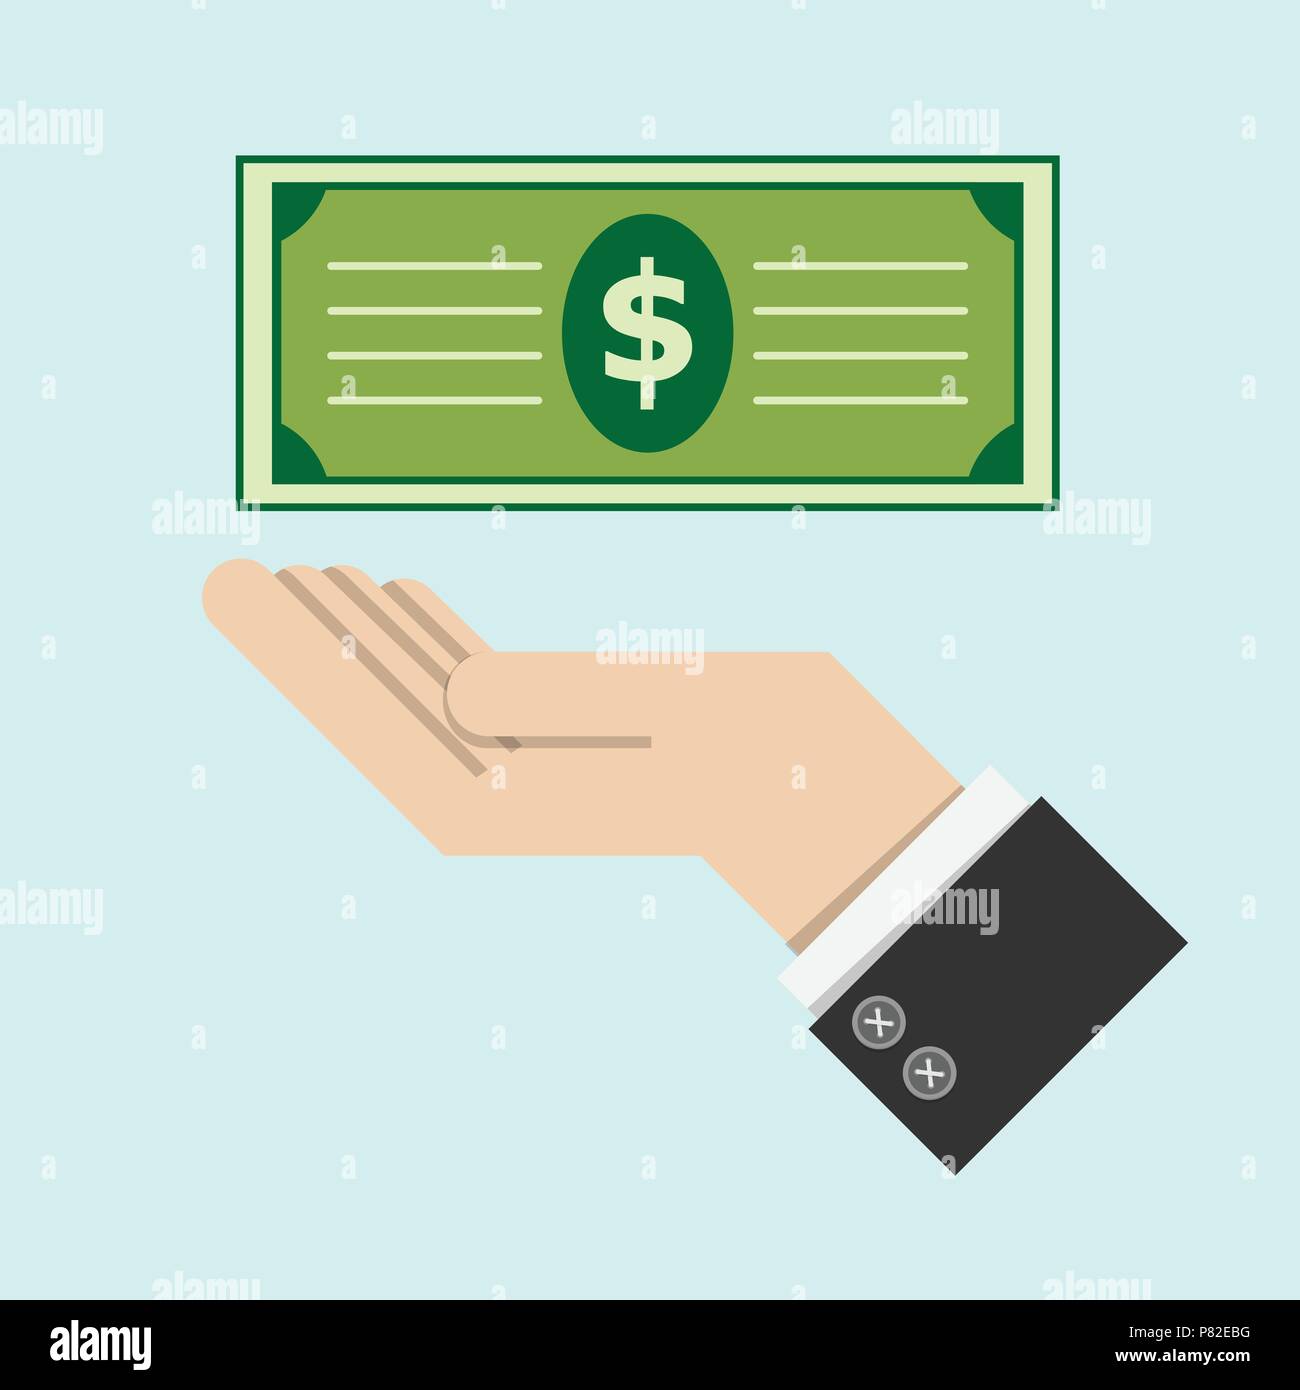 return of an investment concept. banknote with sign of dollar currency on hand, palm of businessman. invest growth,finance plan, personal management,  Stock Vector